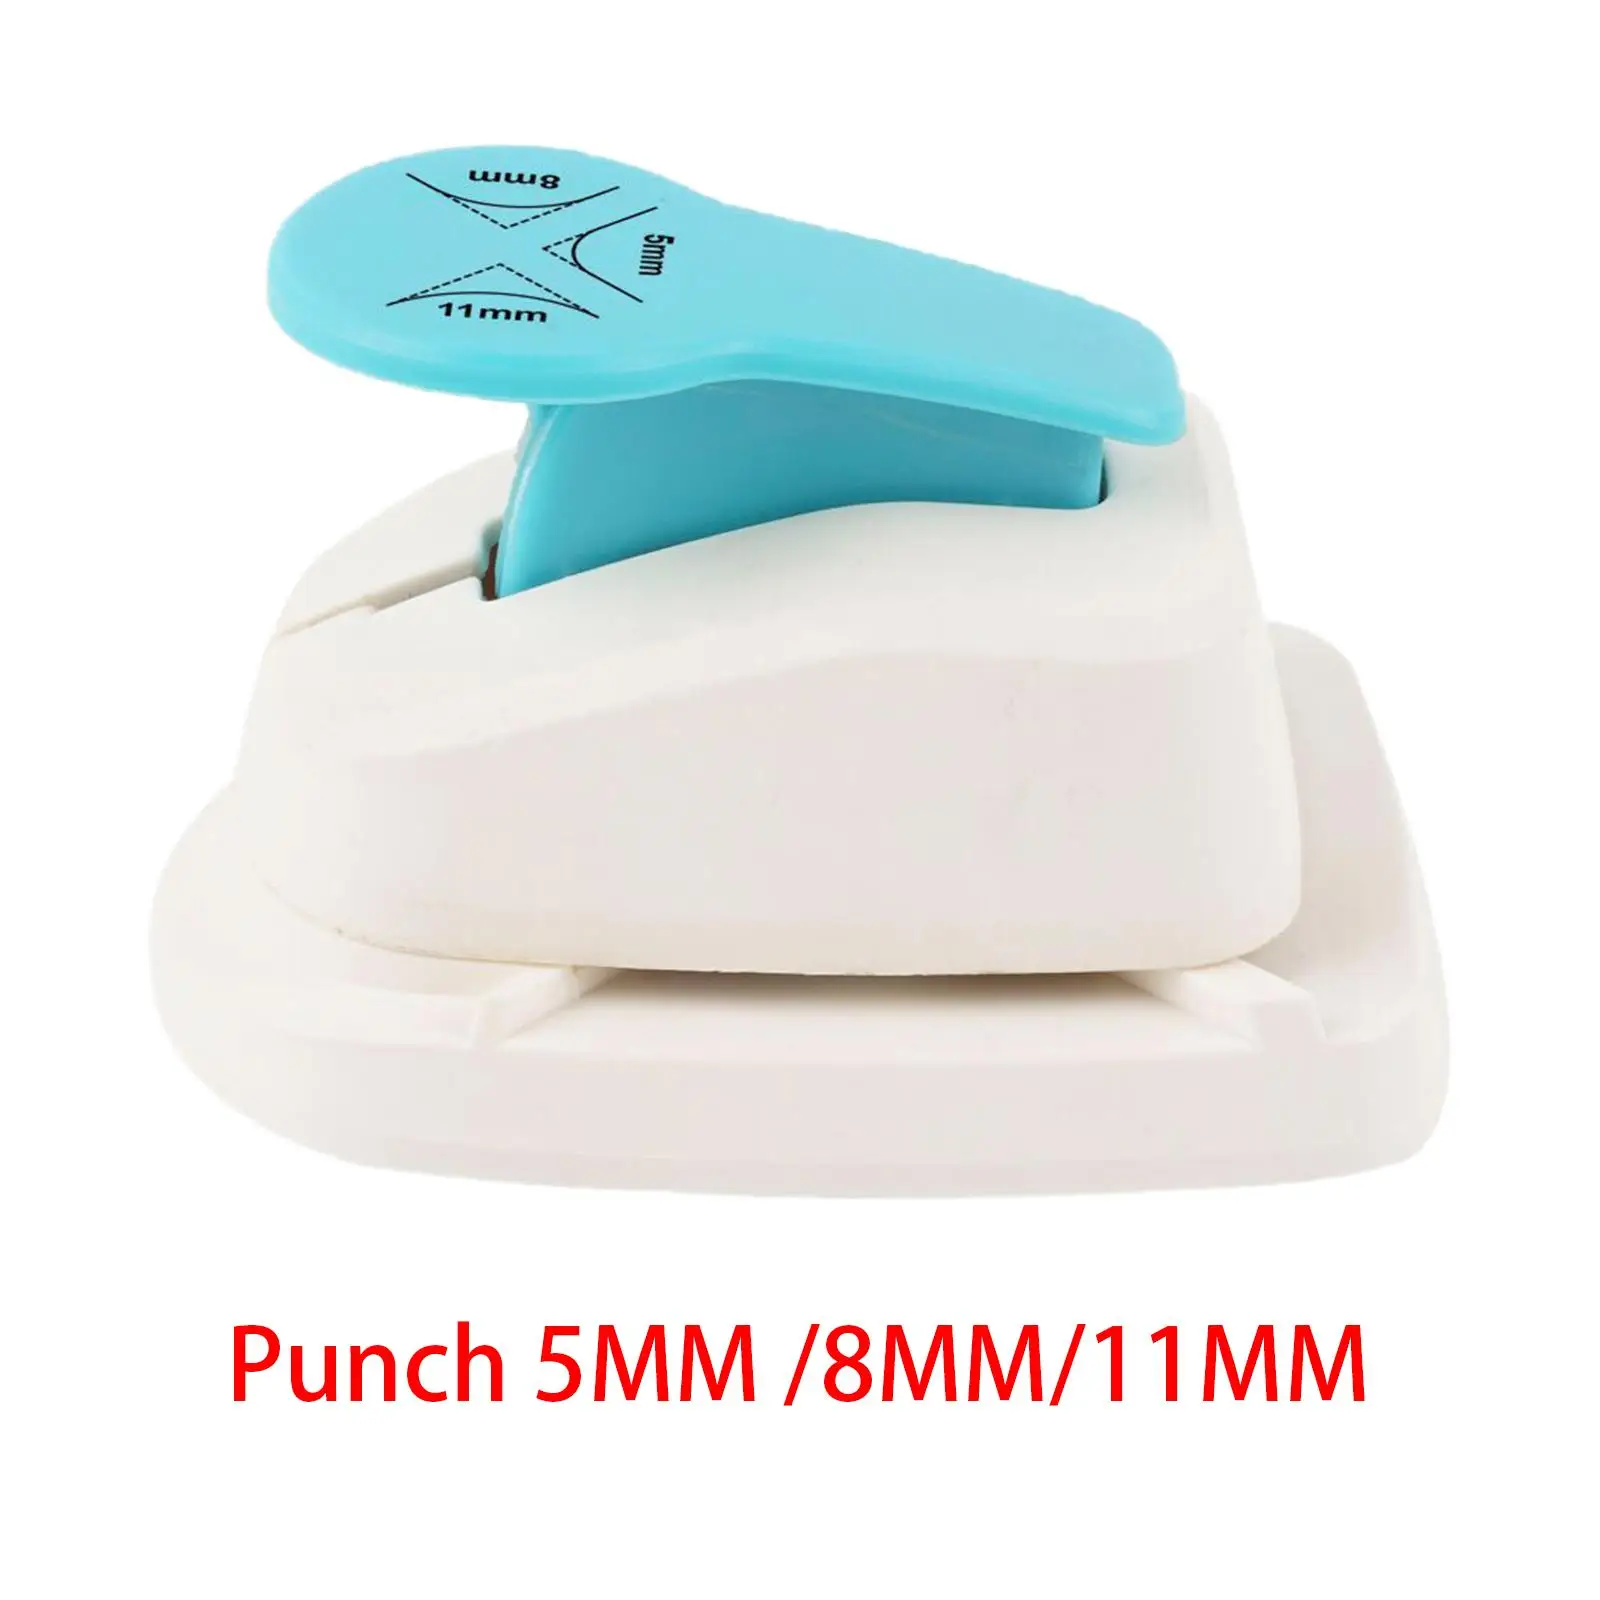 3 in 1 Corner Punch Portable Paper Corner Rounder for Scrapbook Pages DIY Projects Greeting Card Wedding Invitations Card Making